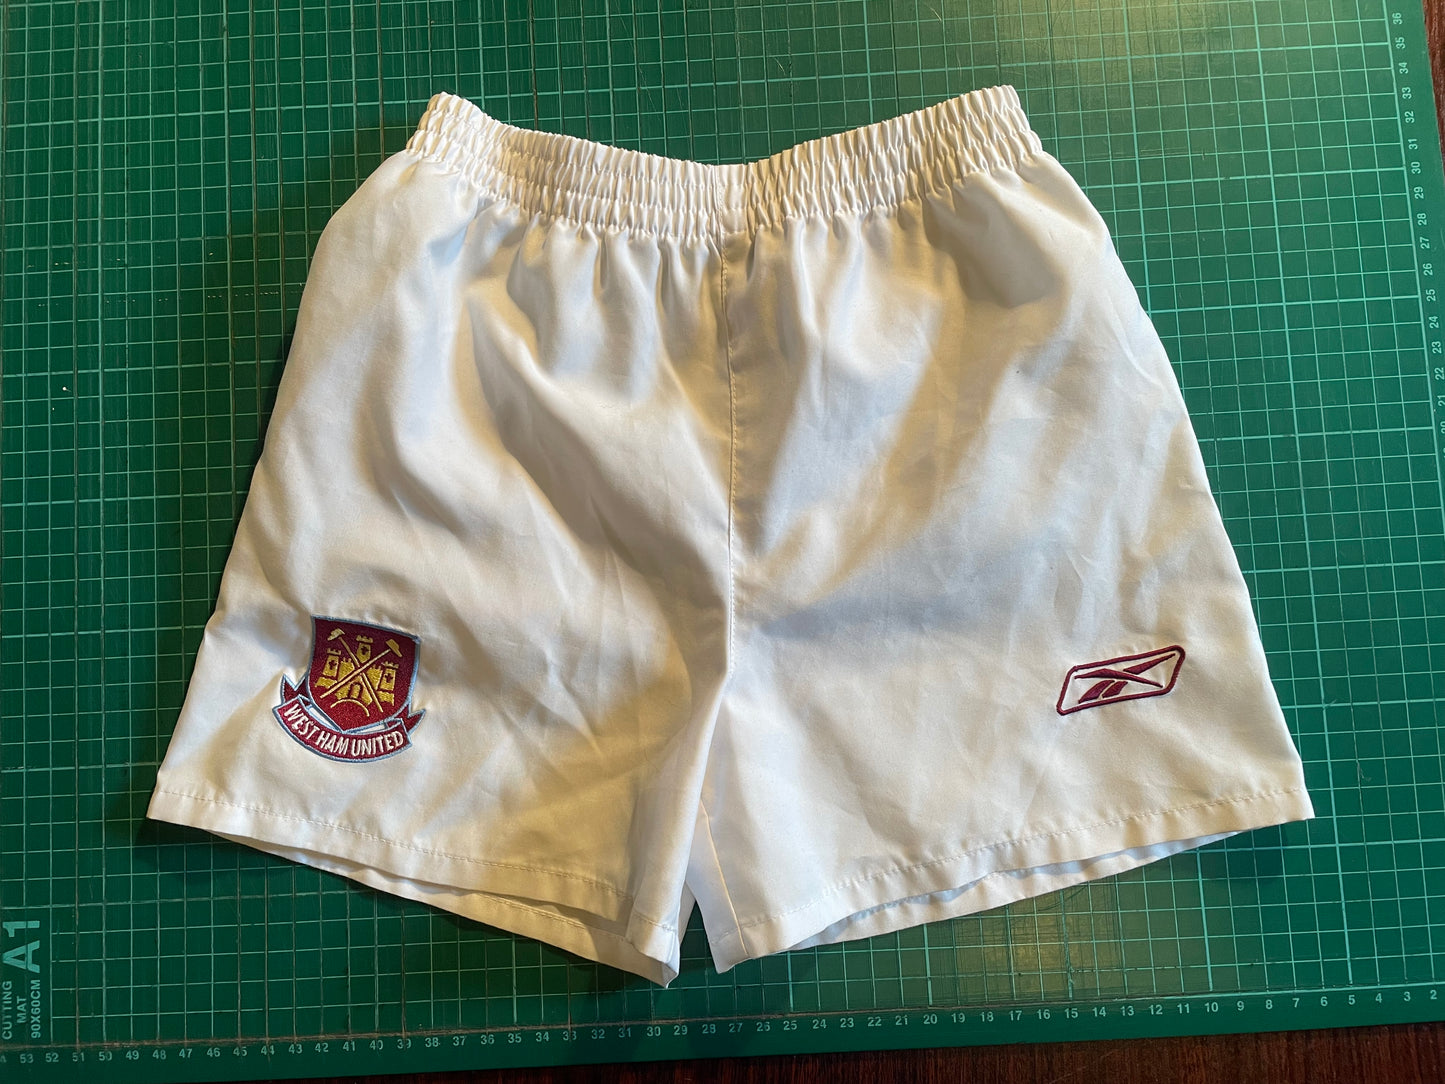 West Ham shirt & shorts 2003 (excellent) Childs 2-3 years. Shirt Height 12 inches